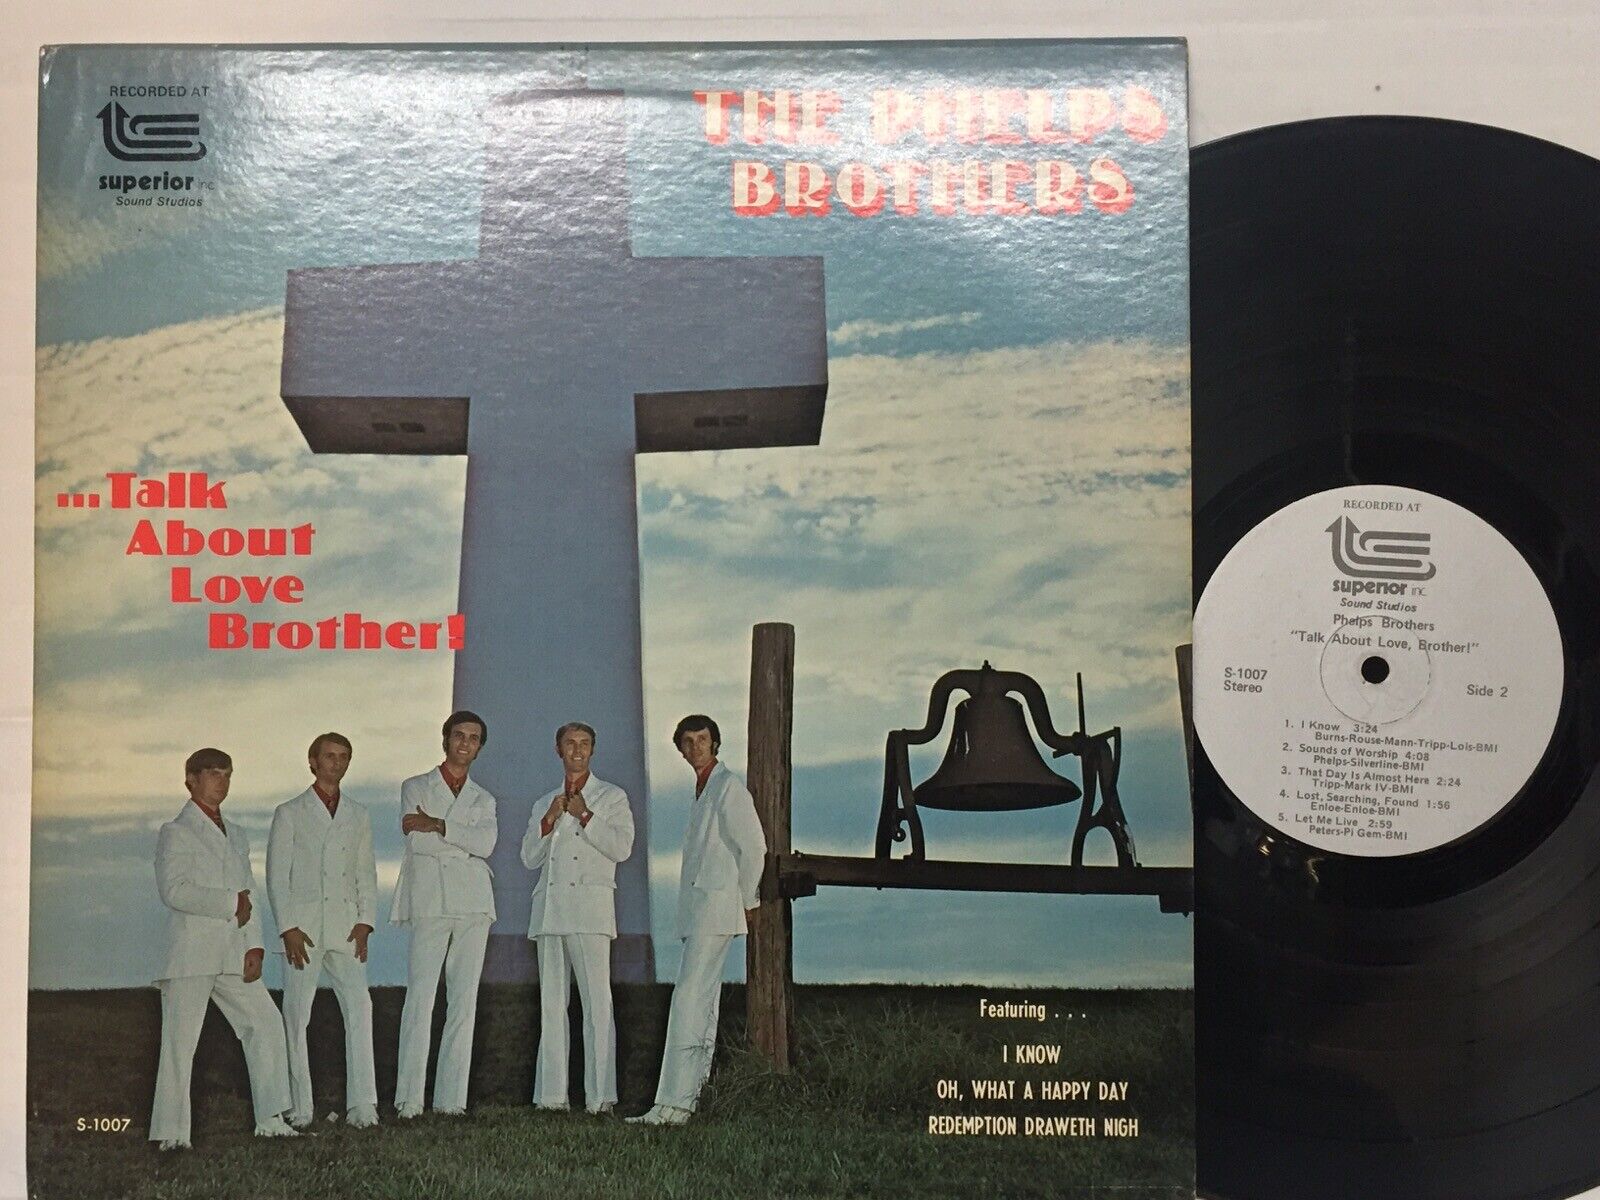 Phelps Brothers Talk About Love VG+ RARE Vintage Christian Music Record LP